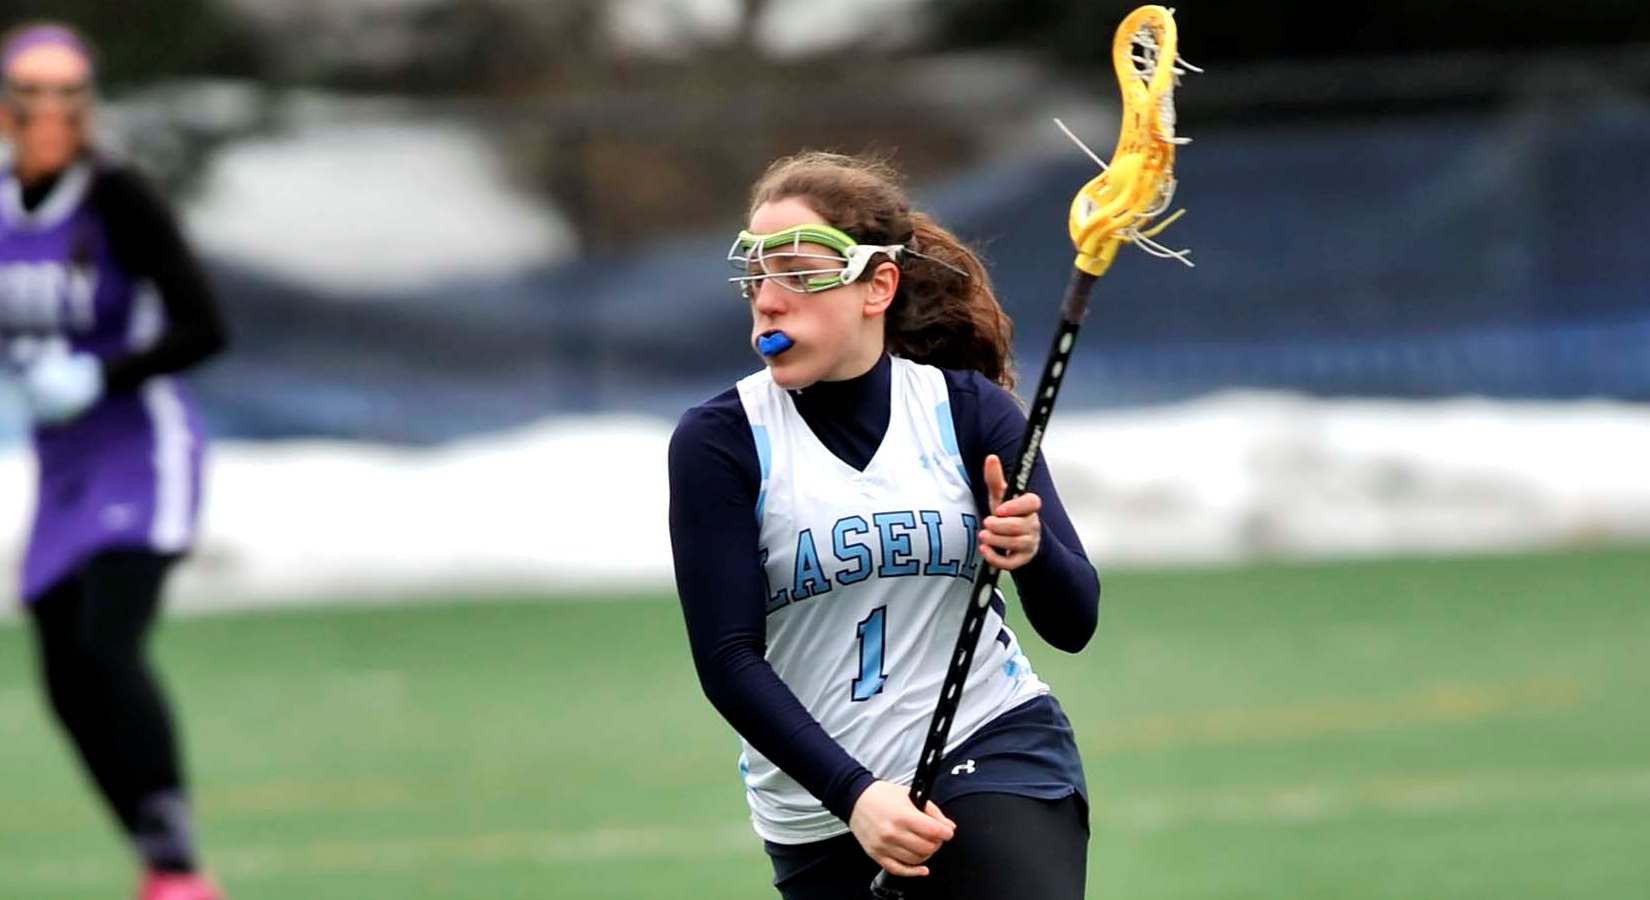 MIT Downs Lasell in Women's Lacrosse Action